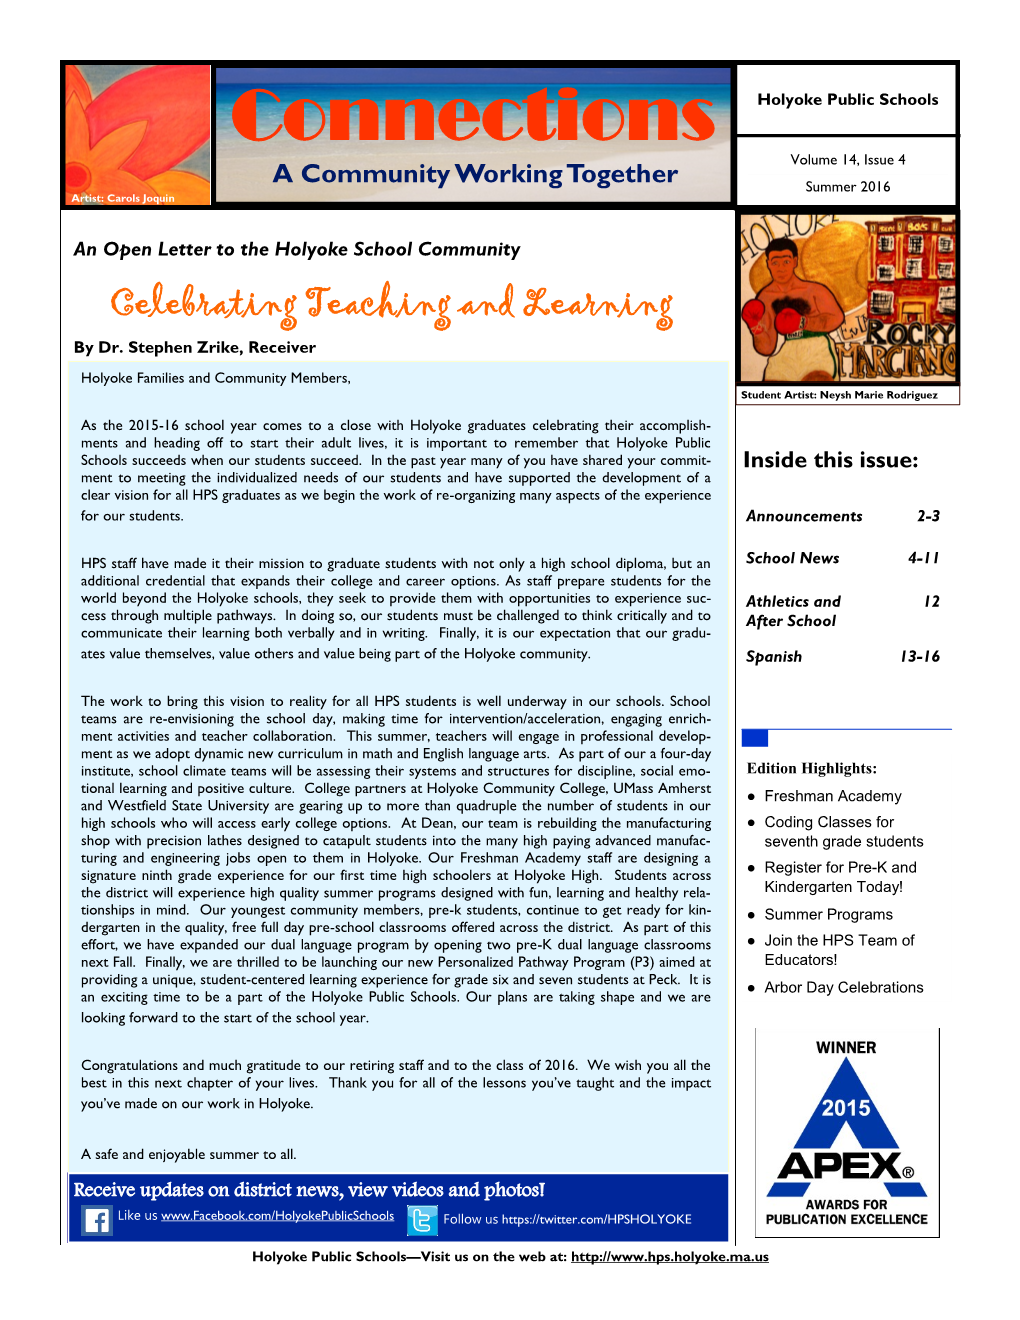 Connections Holyoke Public Schools Volume 14, Issue 4 a Community Working Together Summer 2016 Artist: Carols Joquin a Community Working Together